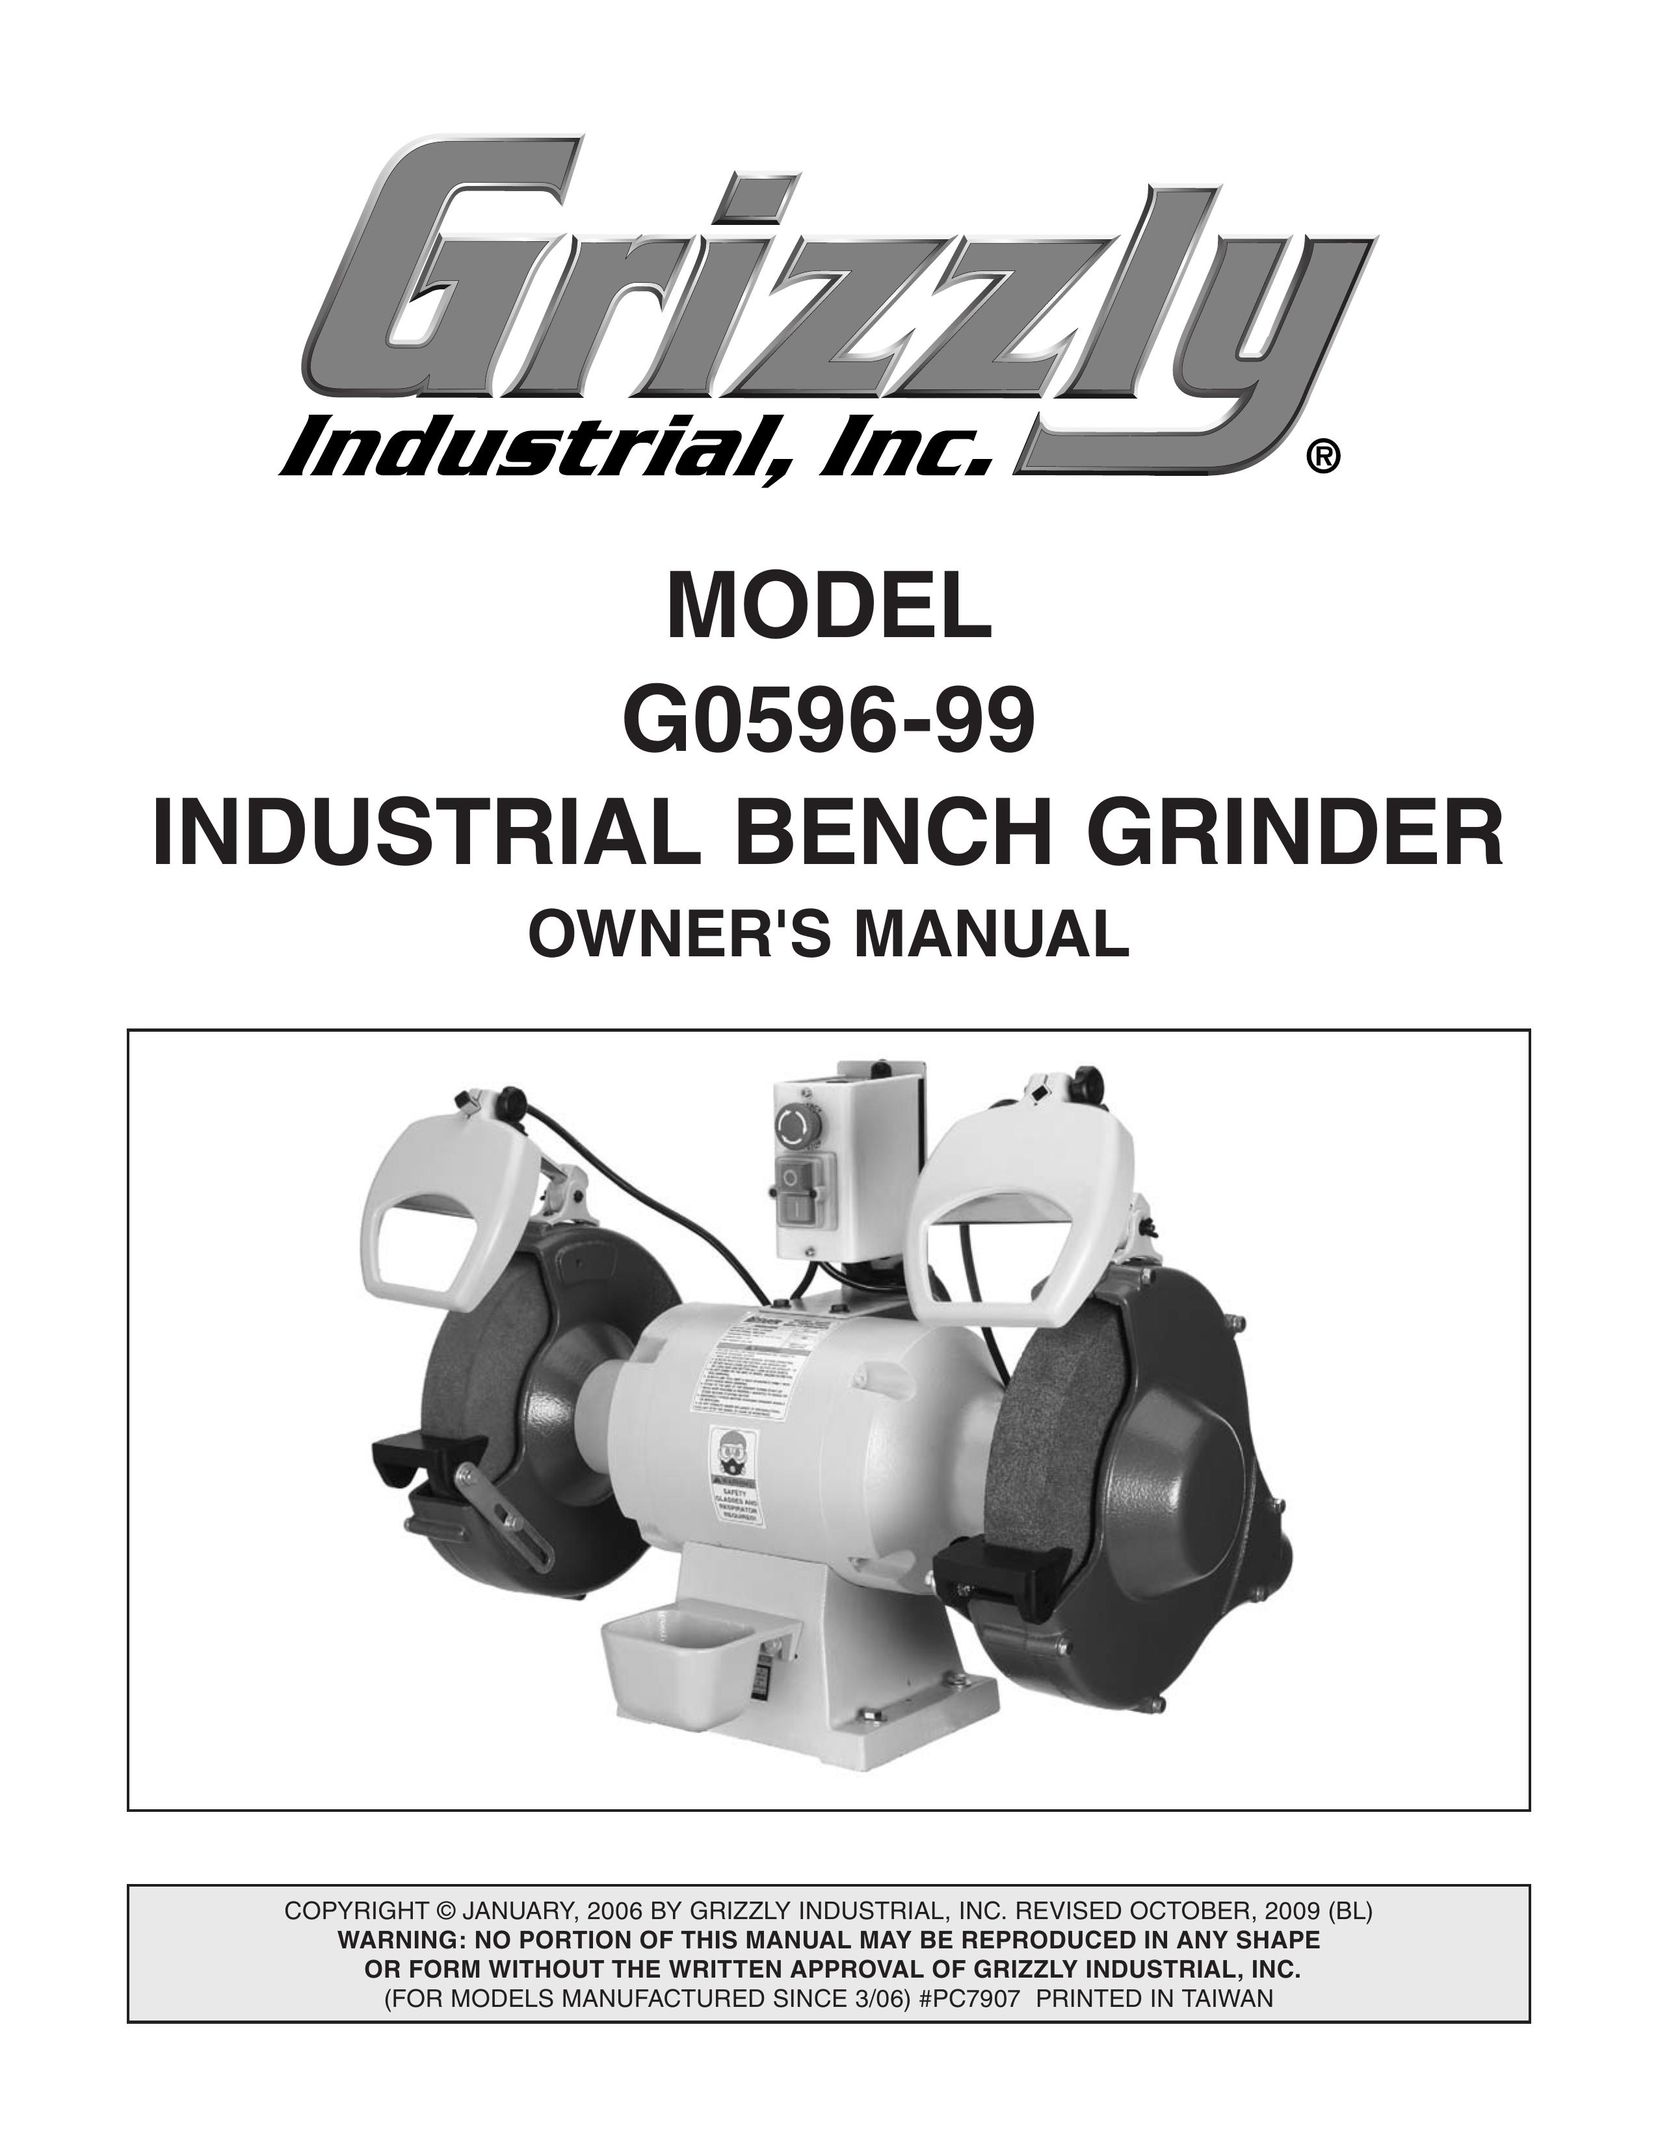 Grizzly G0596-99 Grinder User Manual